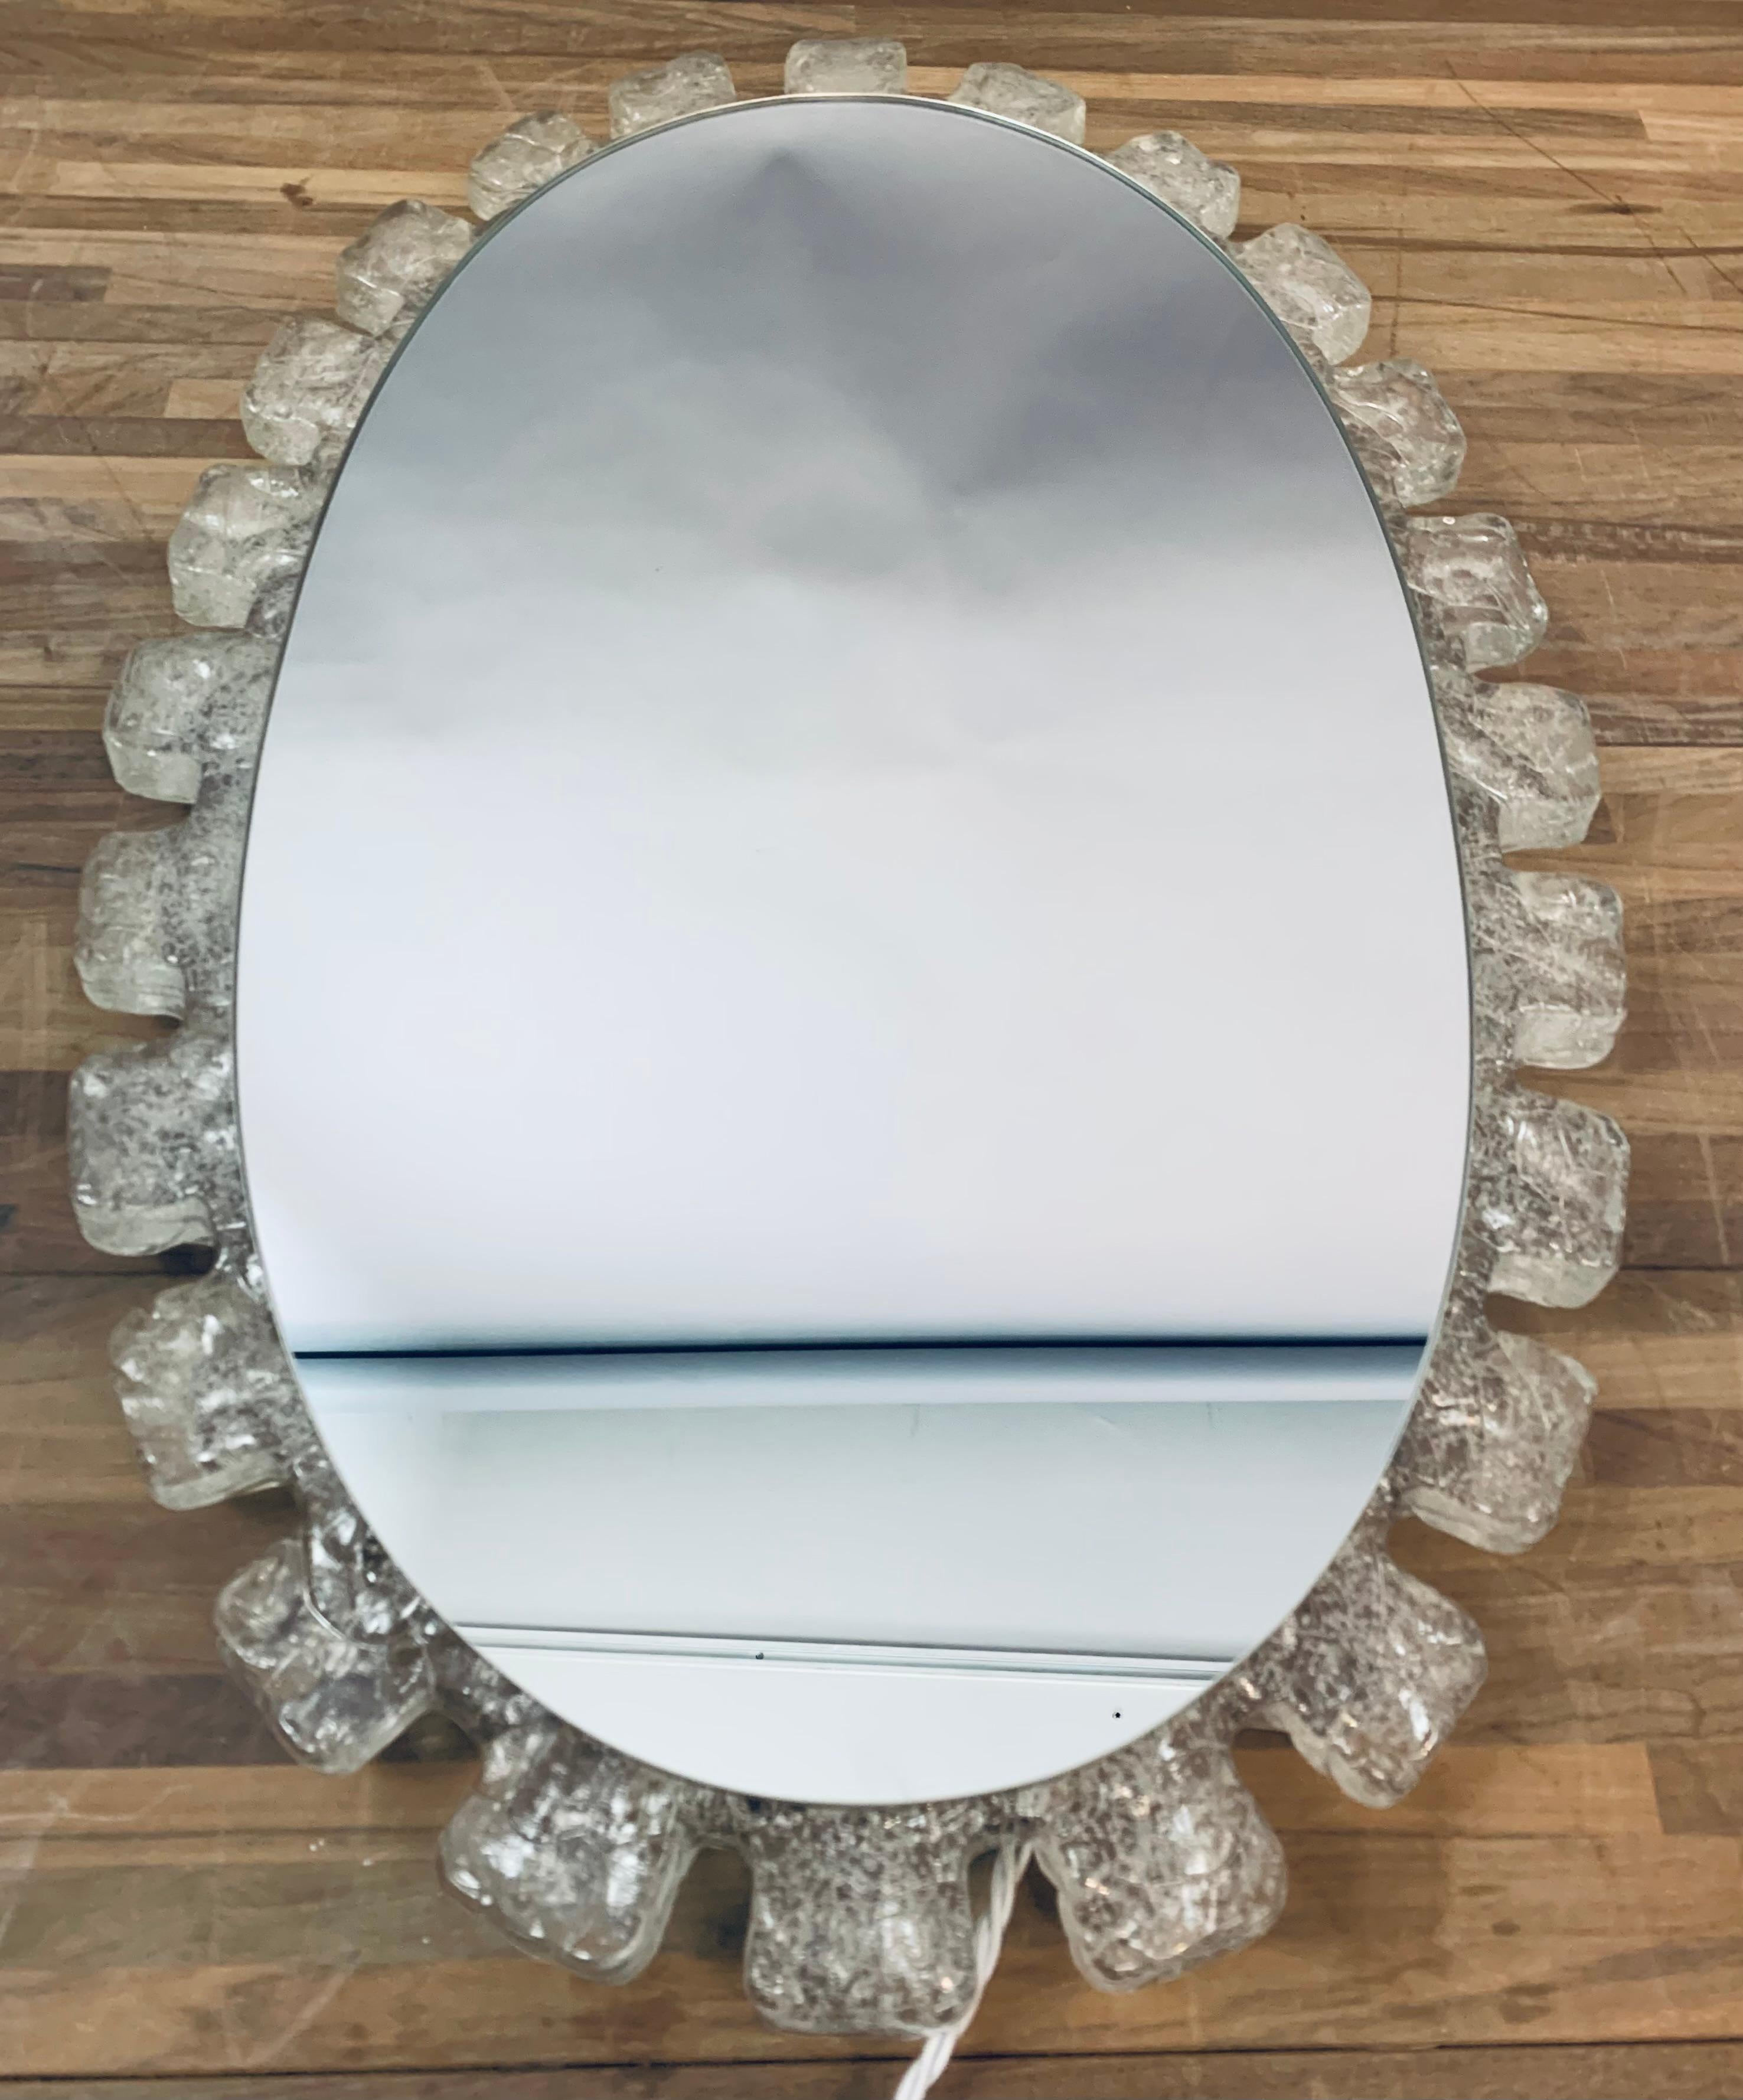 1970s Vintage German Illuminated Hillebrand Lucite Iced Frosted Oval Wall Mirror 7